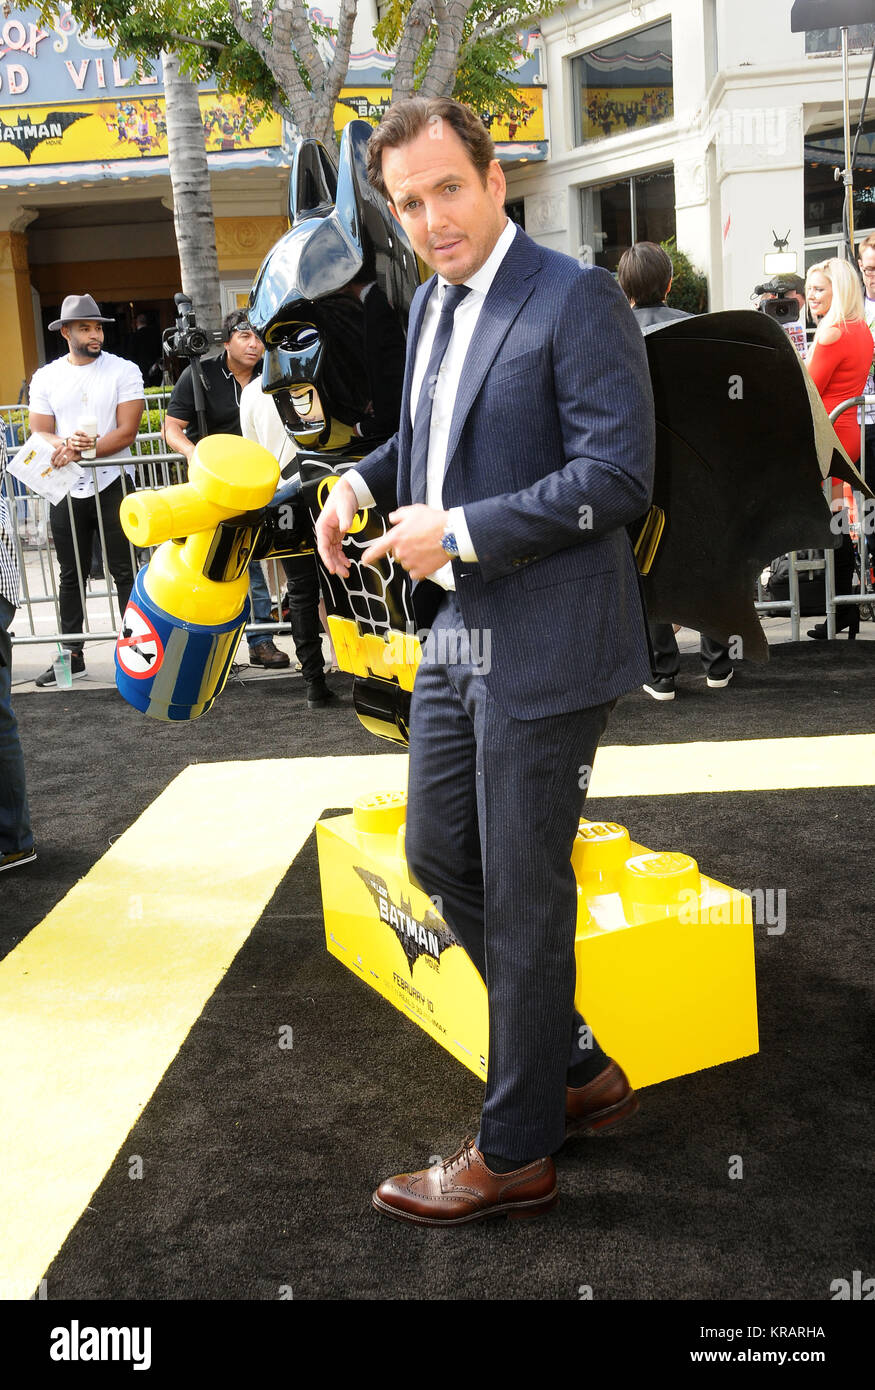 WESTWOOD - FEBRUARY 4: Actor Will Arnett attends the world premiere of Warner Bros. pictures 'The LEGO Batman Movie' at Regency Village Theatre on February 4, 2017 in Westwood, California. Photo by Barry King/Alamy Stock Photo Stock Photo